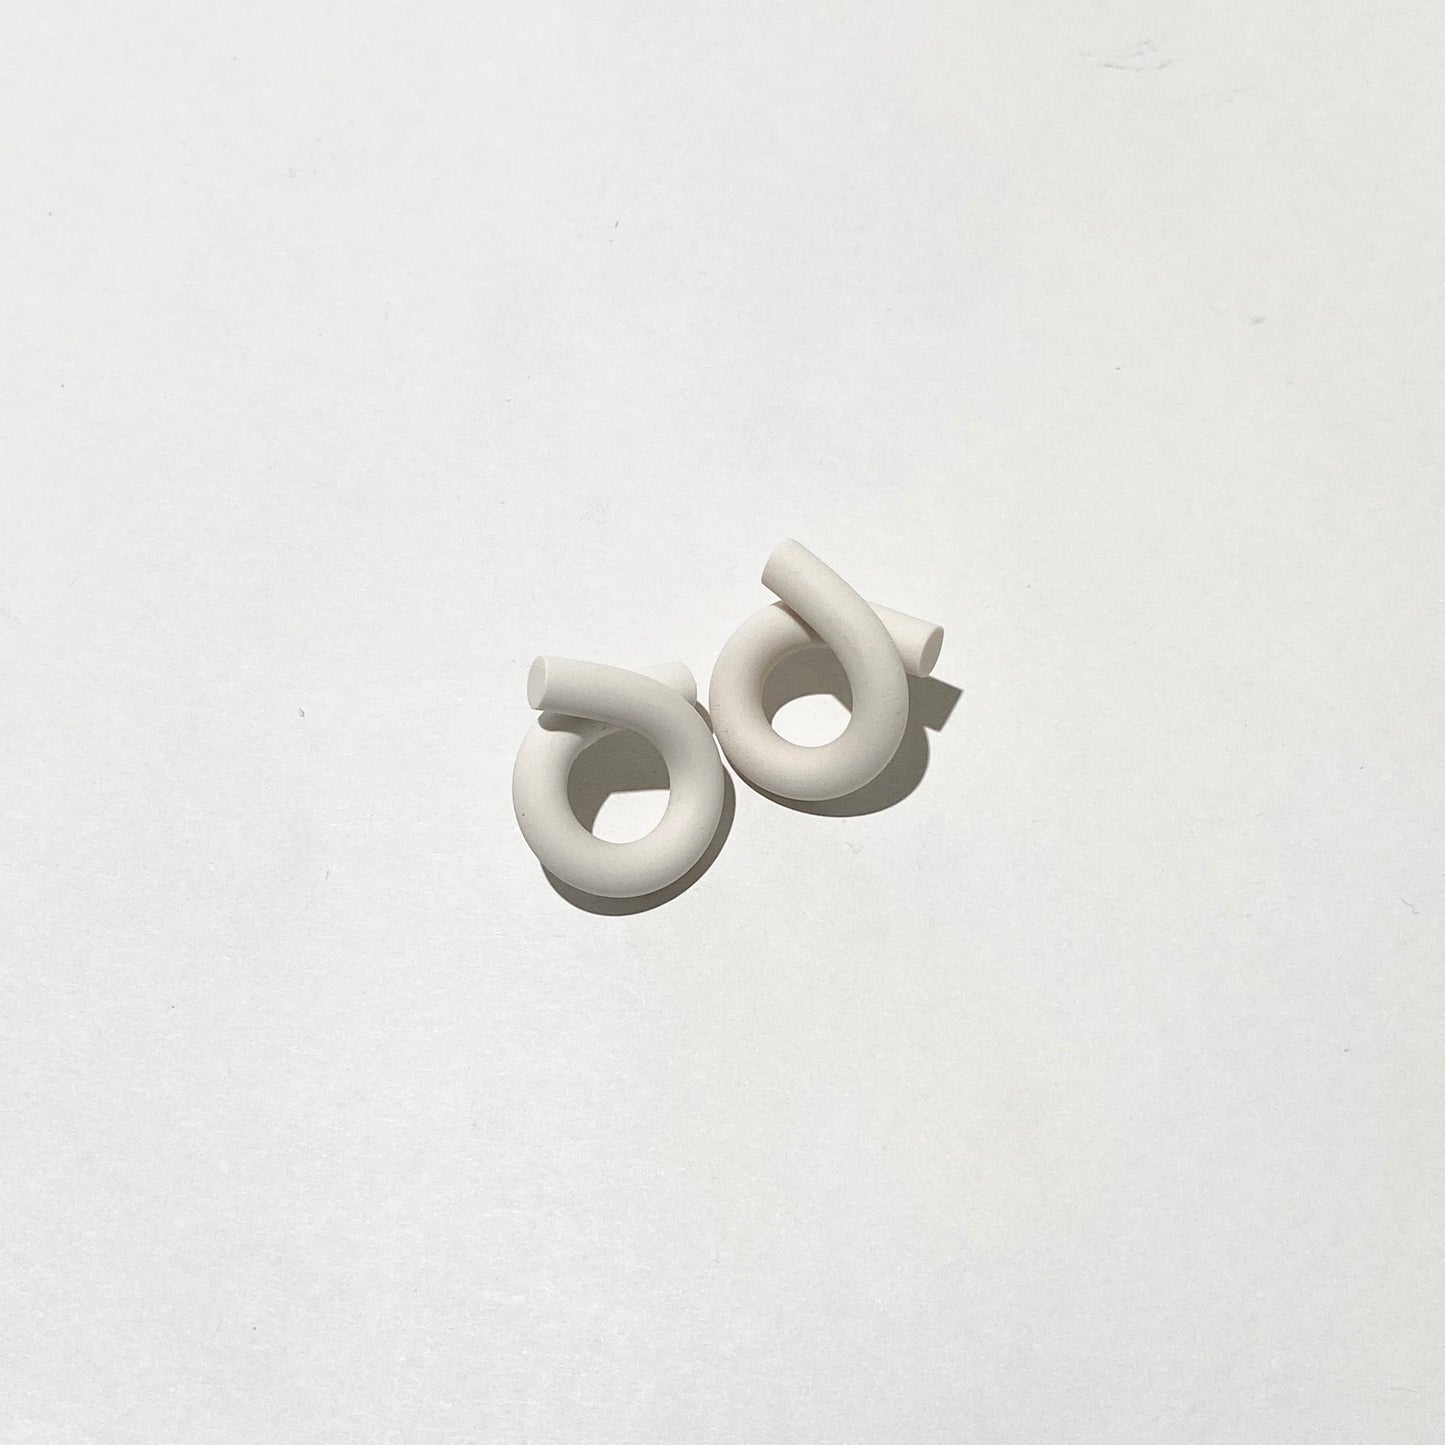 Loop earring seconds and samples